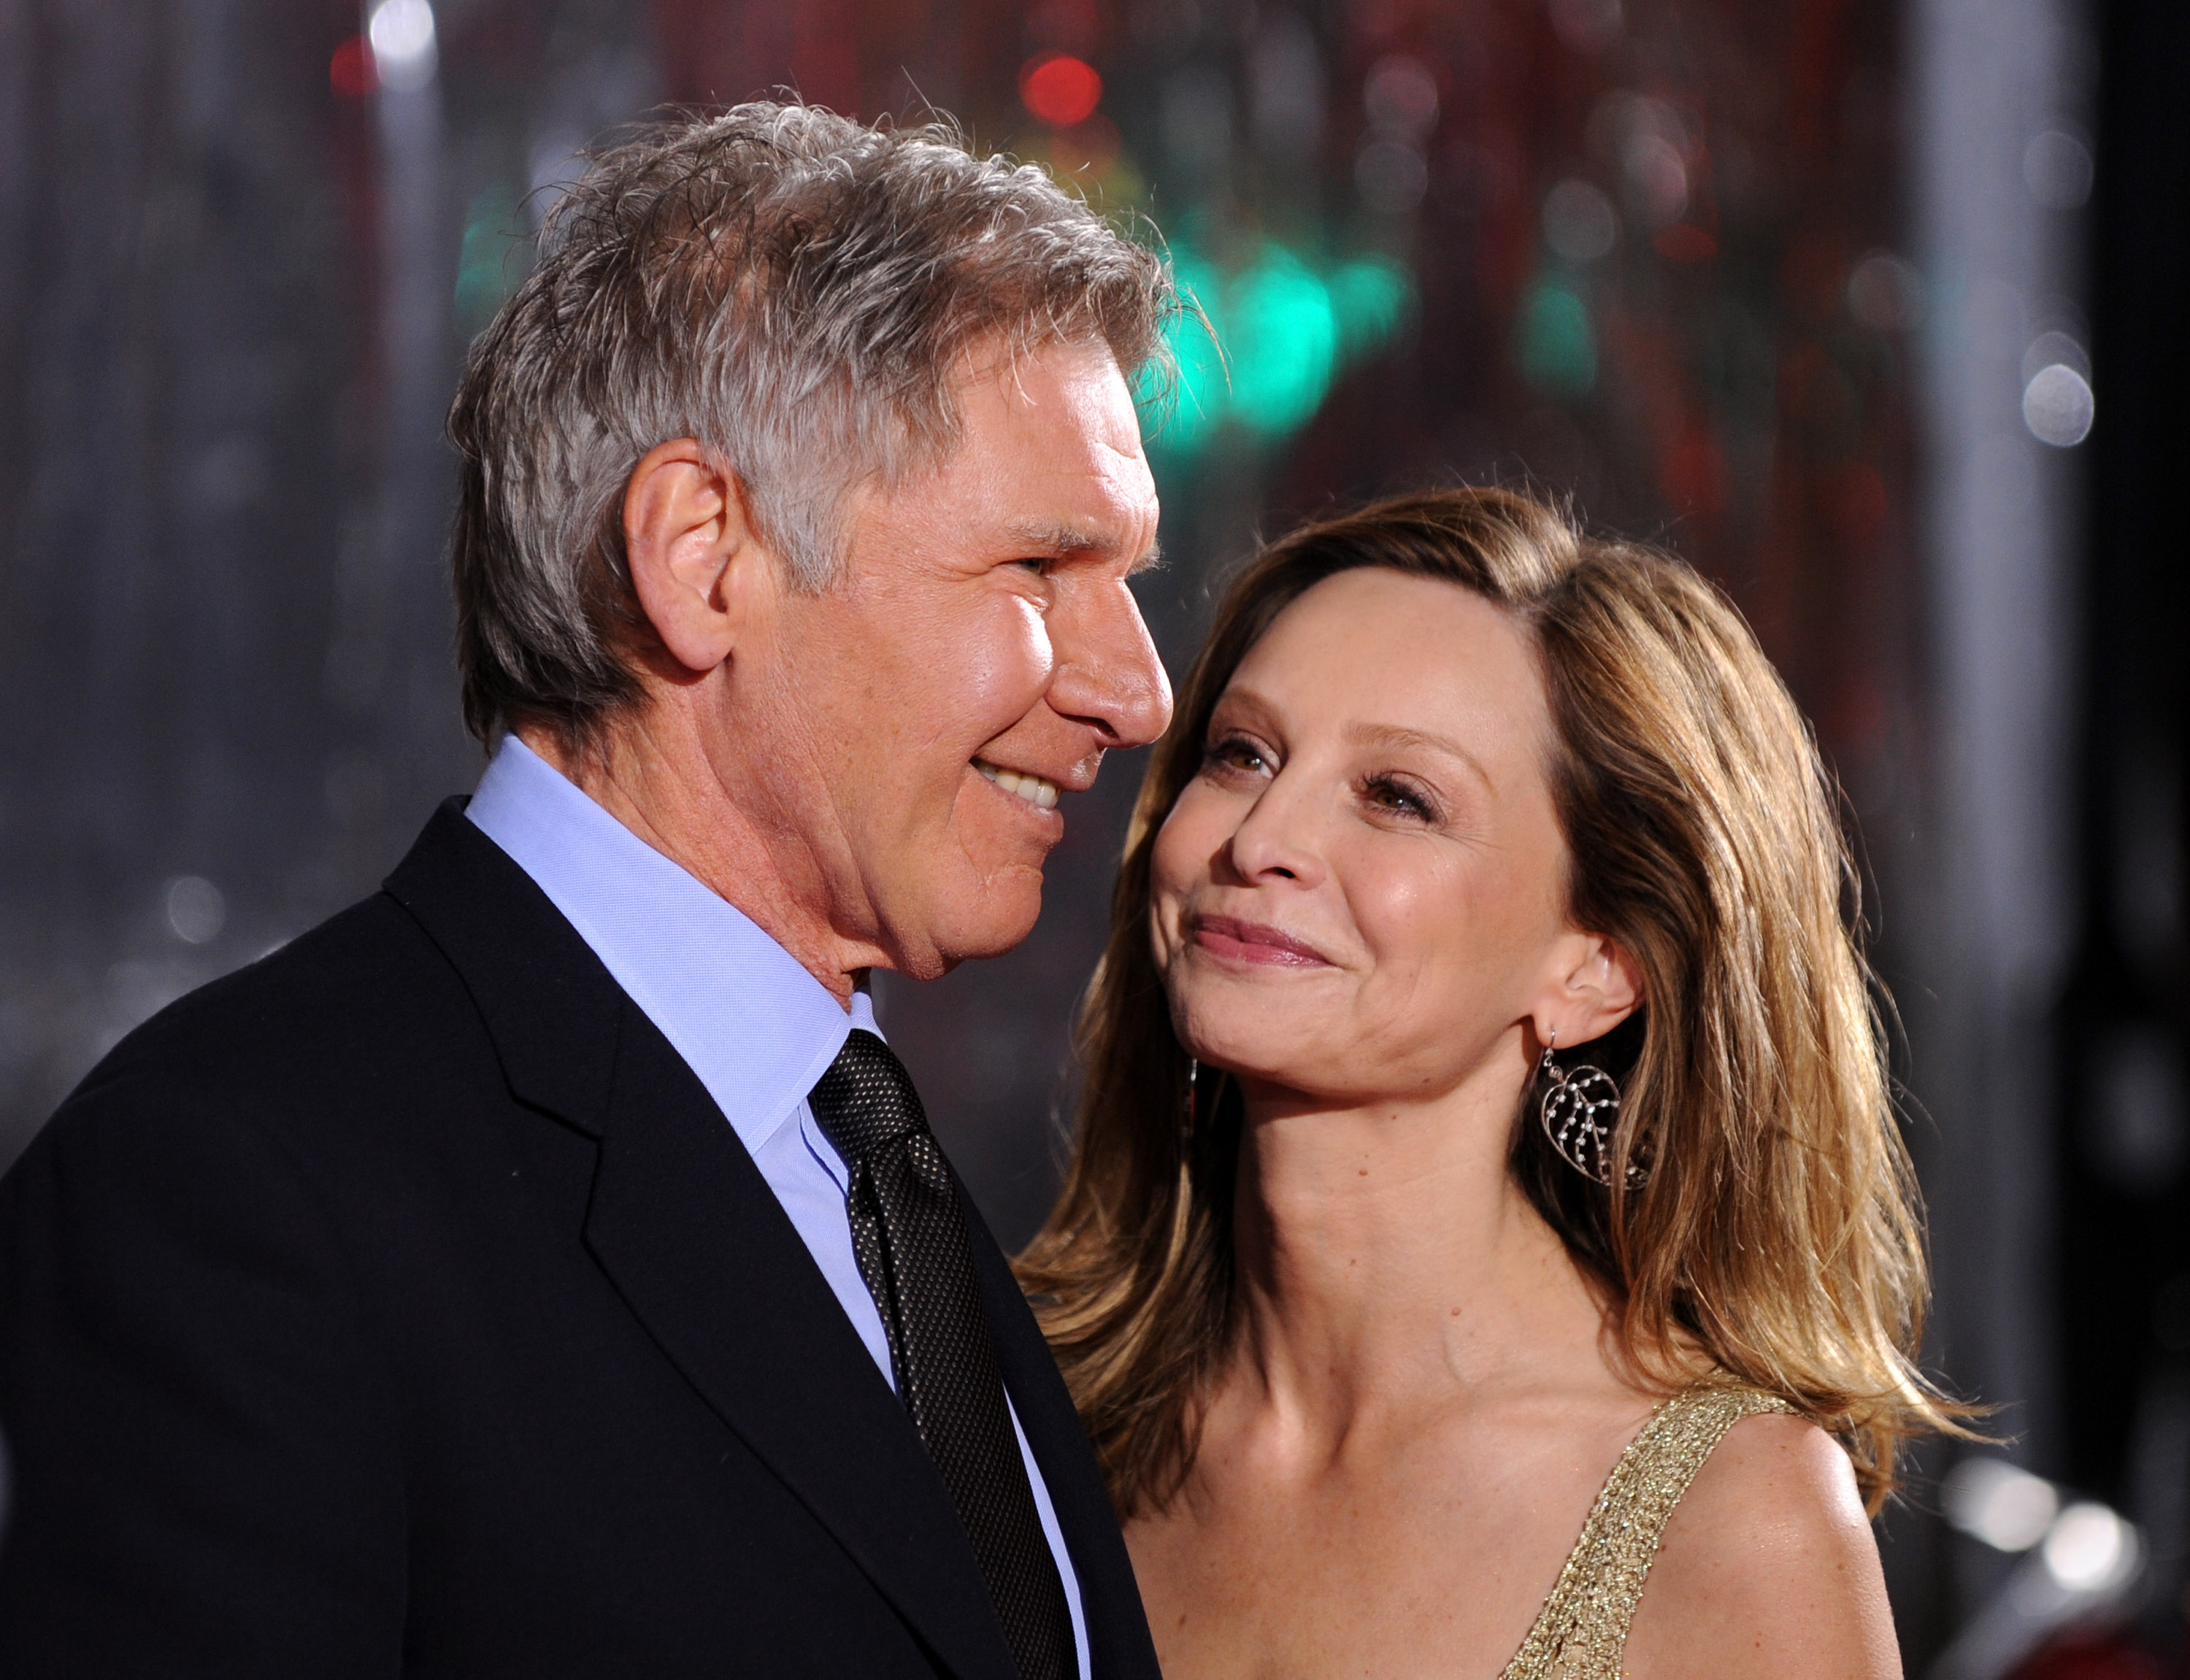 Harrison Ford and Calista Flockhart, actress arrives at the premiere of CBS Films' "Extraordinary Measures" held at the Grauman's Chinese Theatre on January 19, 2010 in Hollywood, California | Source: Getty Images